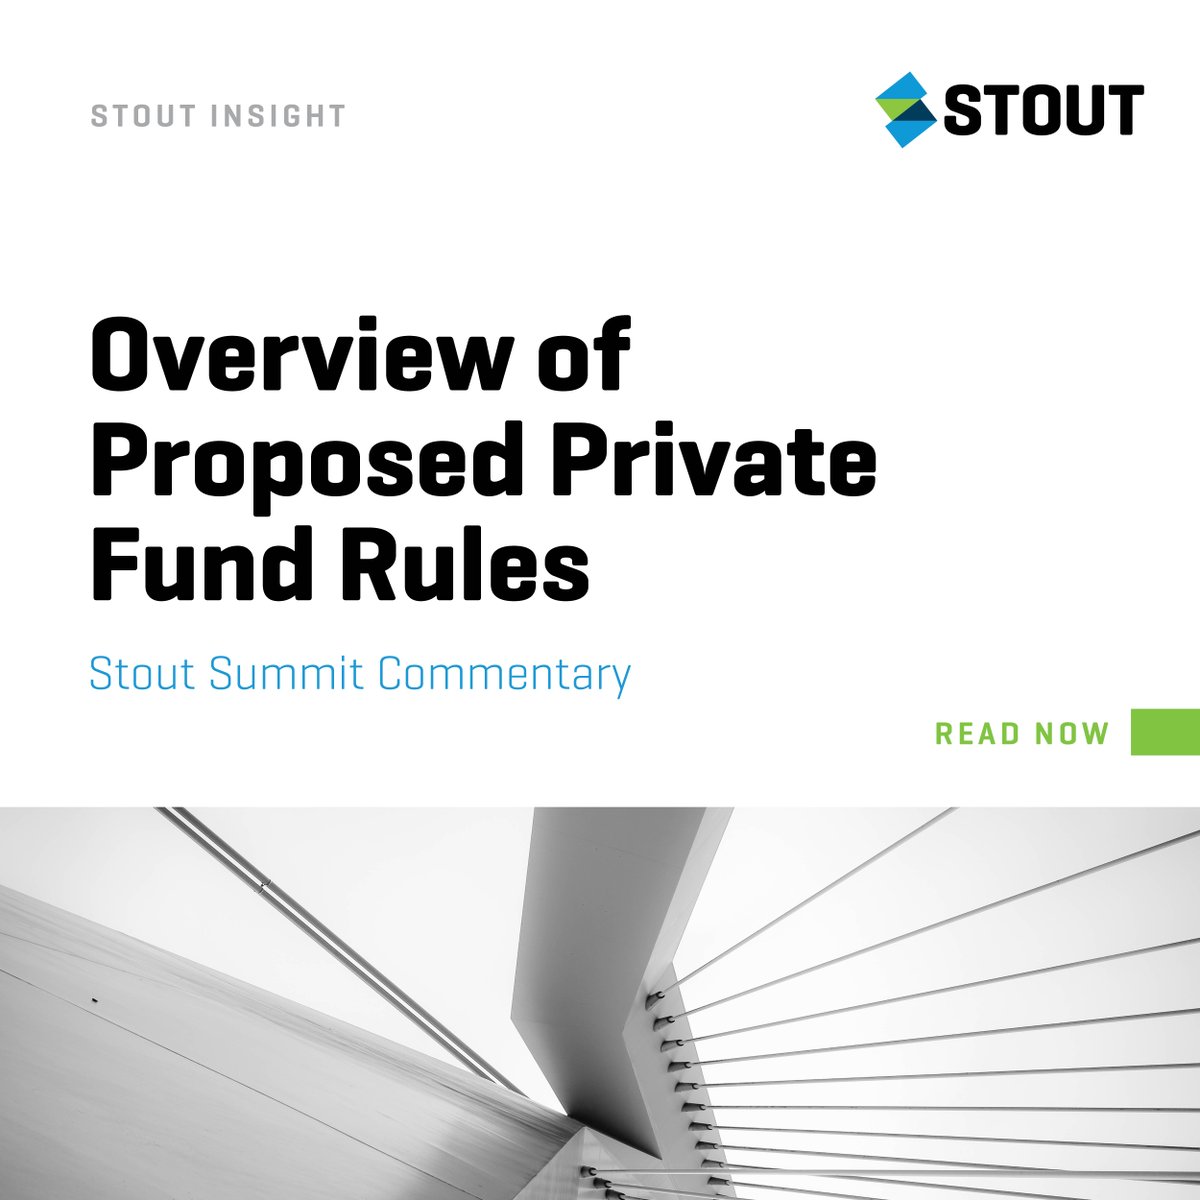 Explore a comprehensive overview of proposed private fund rules for informed insights on regulatory changes. Read the commentary here: bit.ly/3So2Gc4